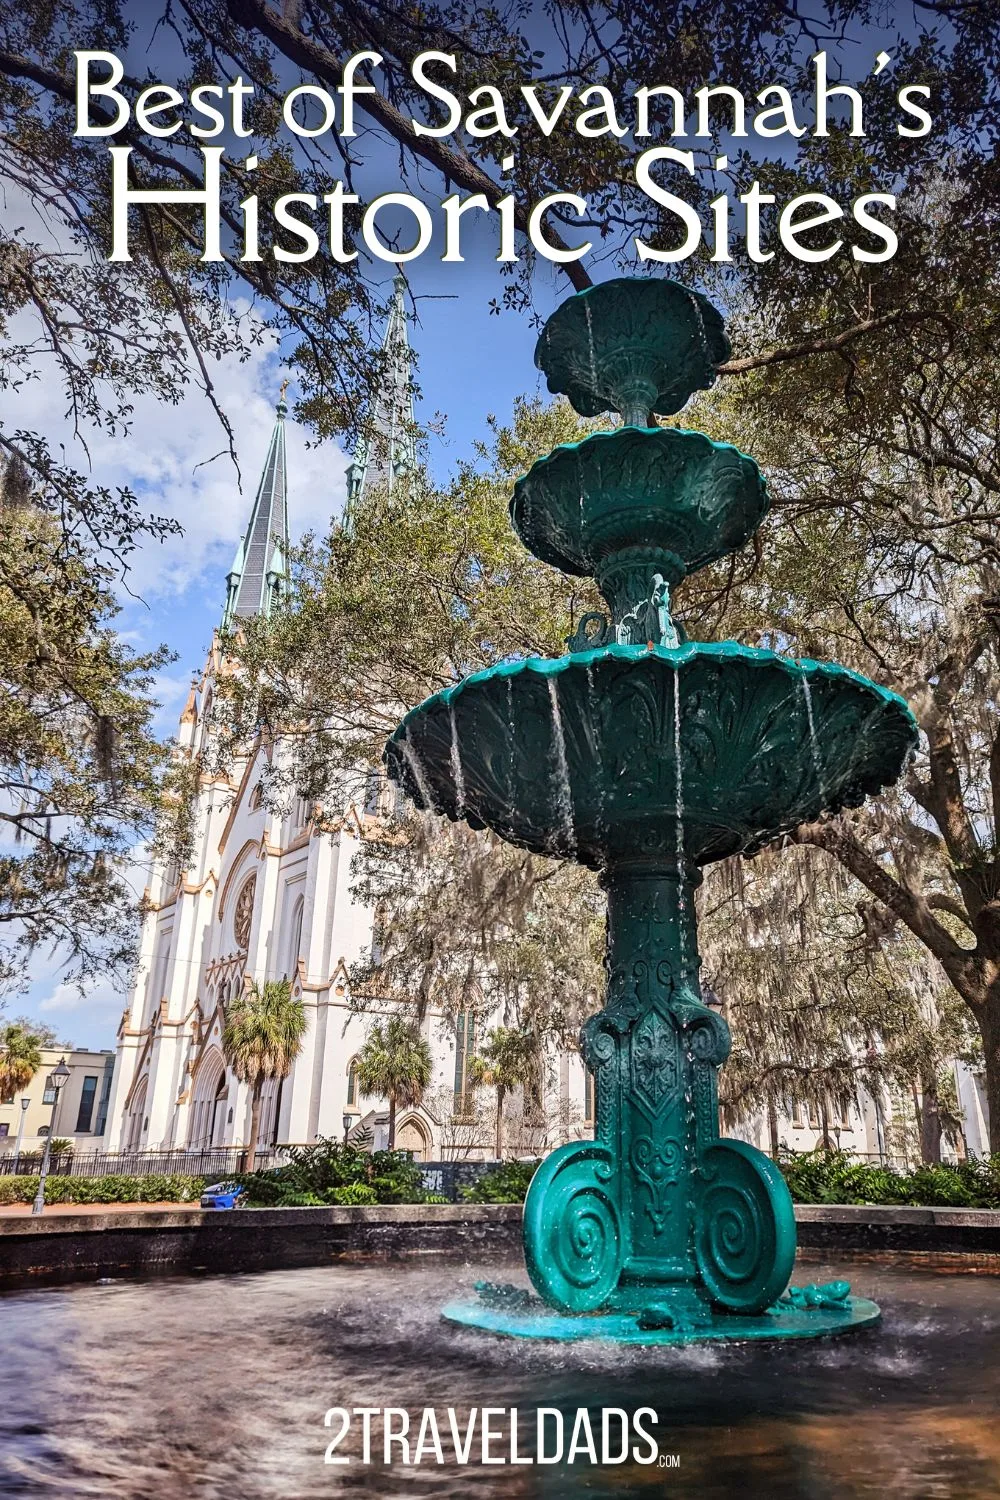 The best historic sites in Savannah are found mostly in the Historic and Victorian Districts, but there are more. See what history lovers should not miss in downtown Savannah and just outside of town.